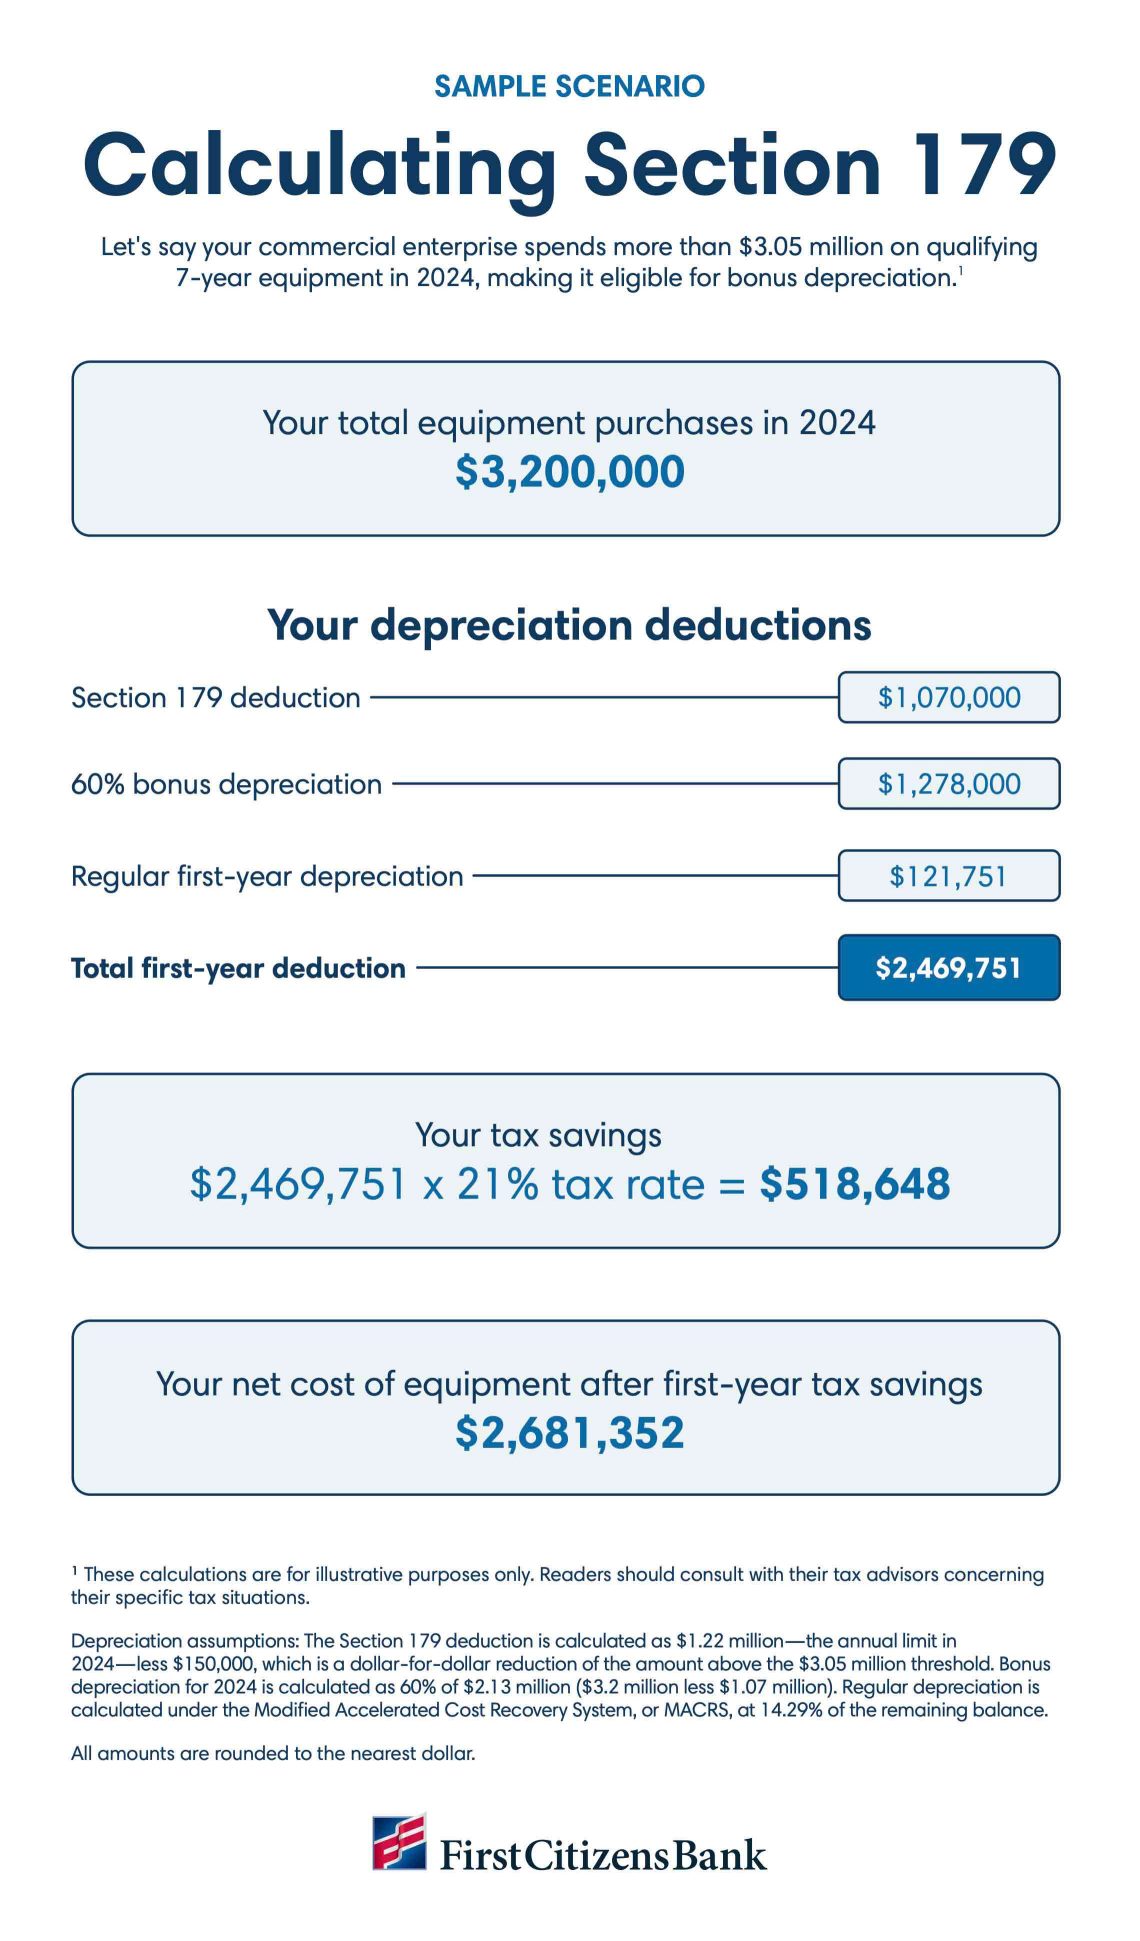 A sample scenario of how to calculate section 179 deductions